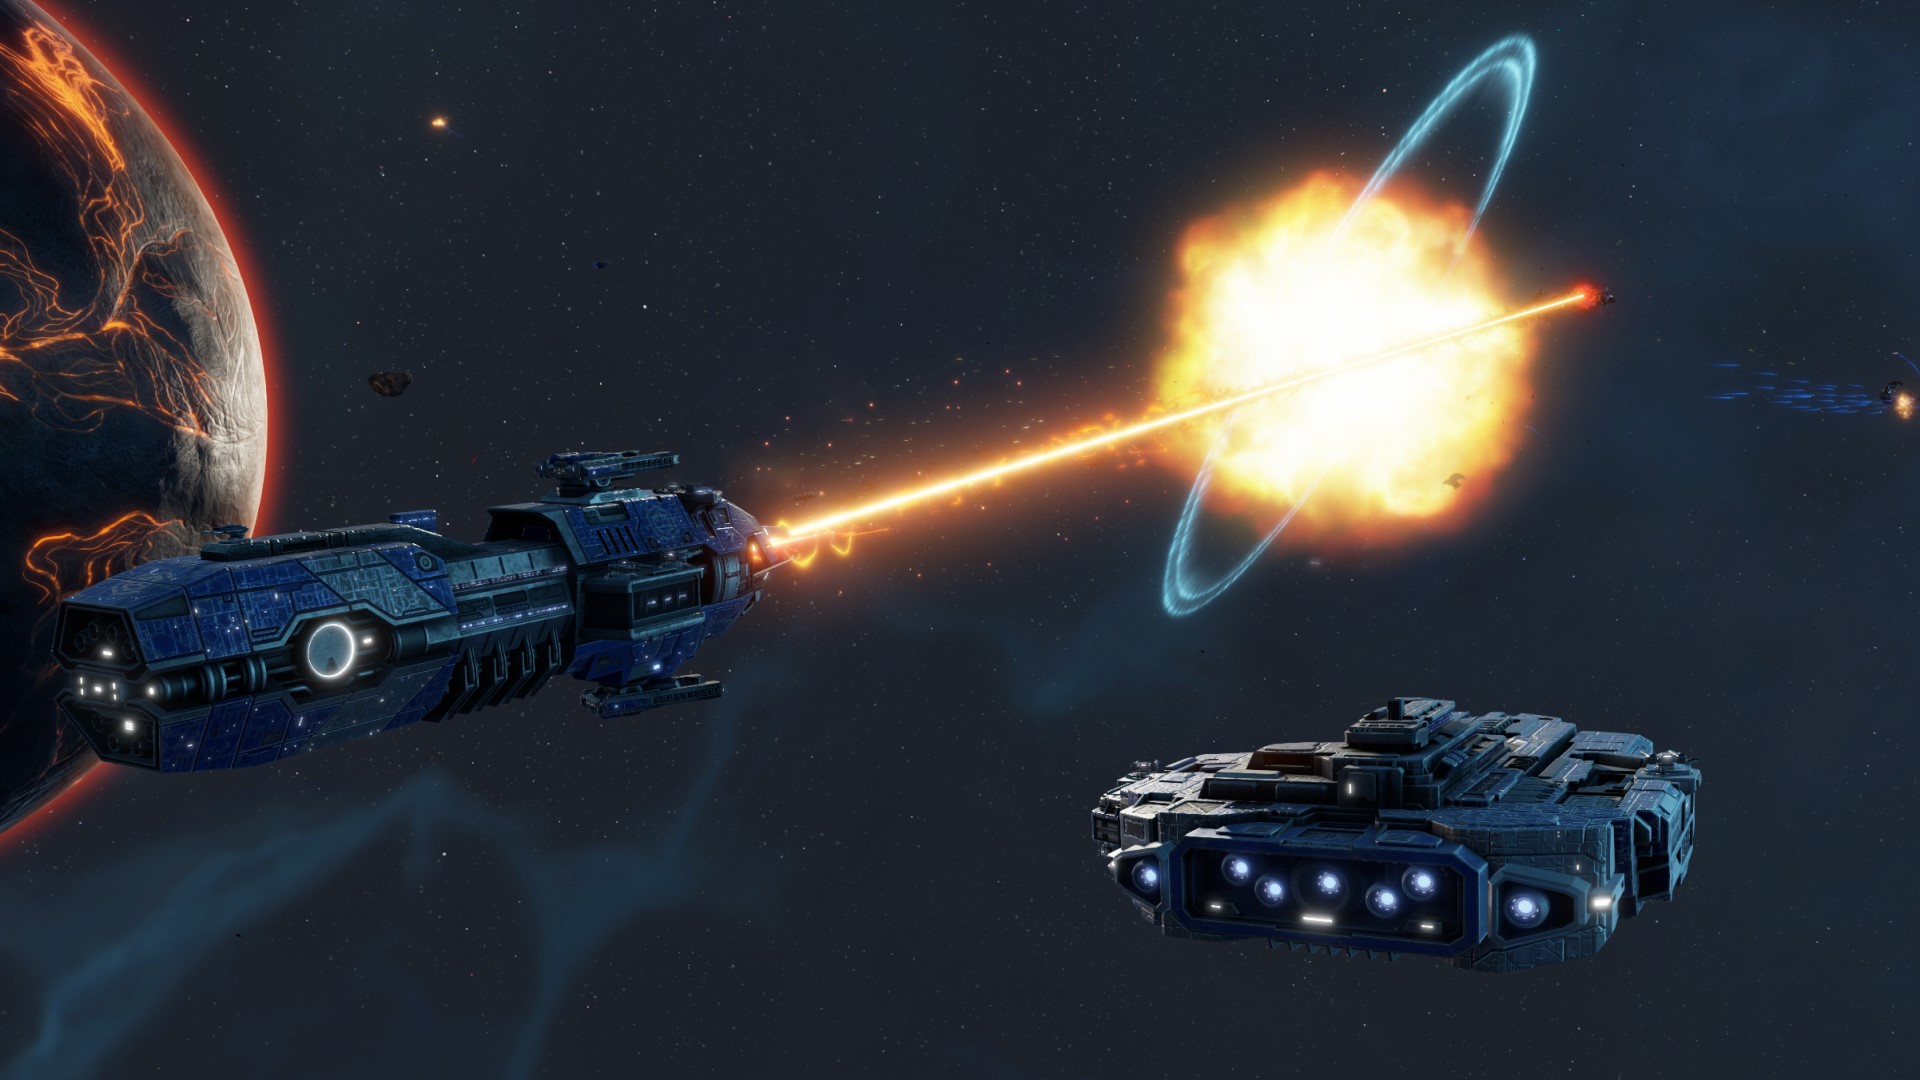 Sins of a Solar Empire 2 multiplayer has arrived in early access